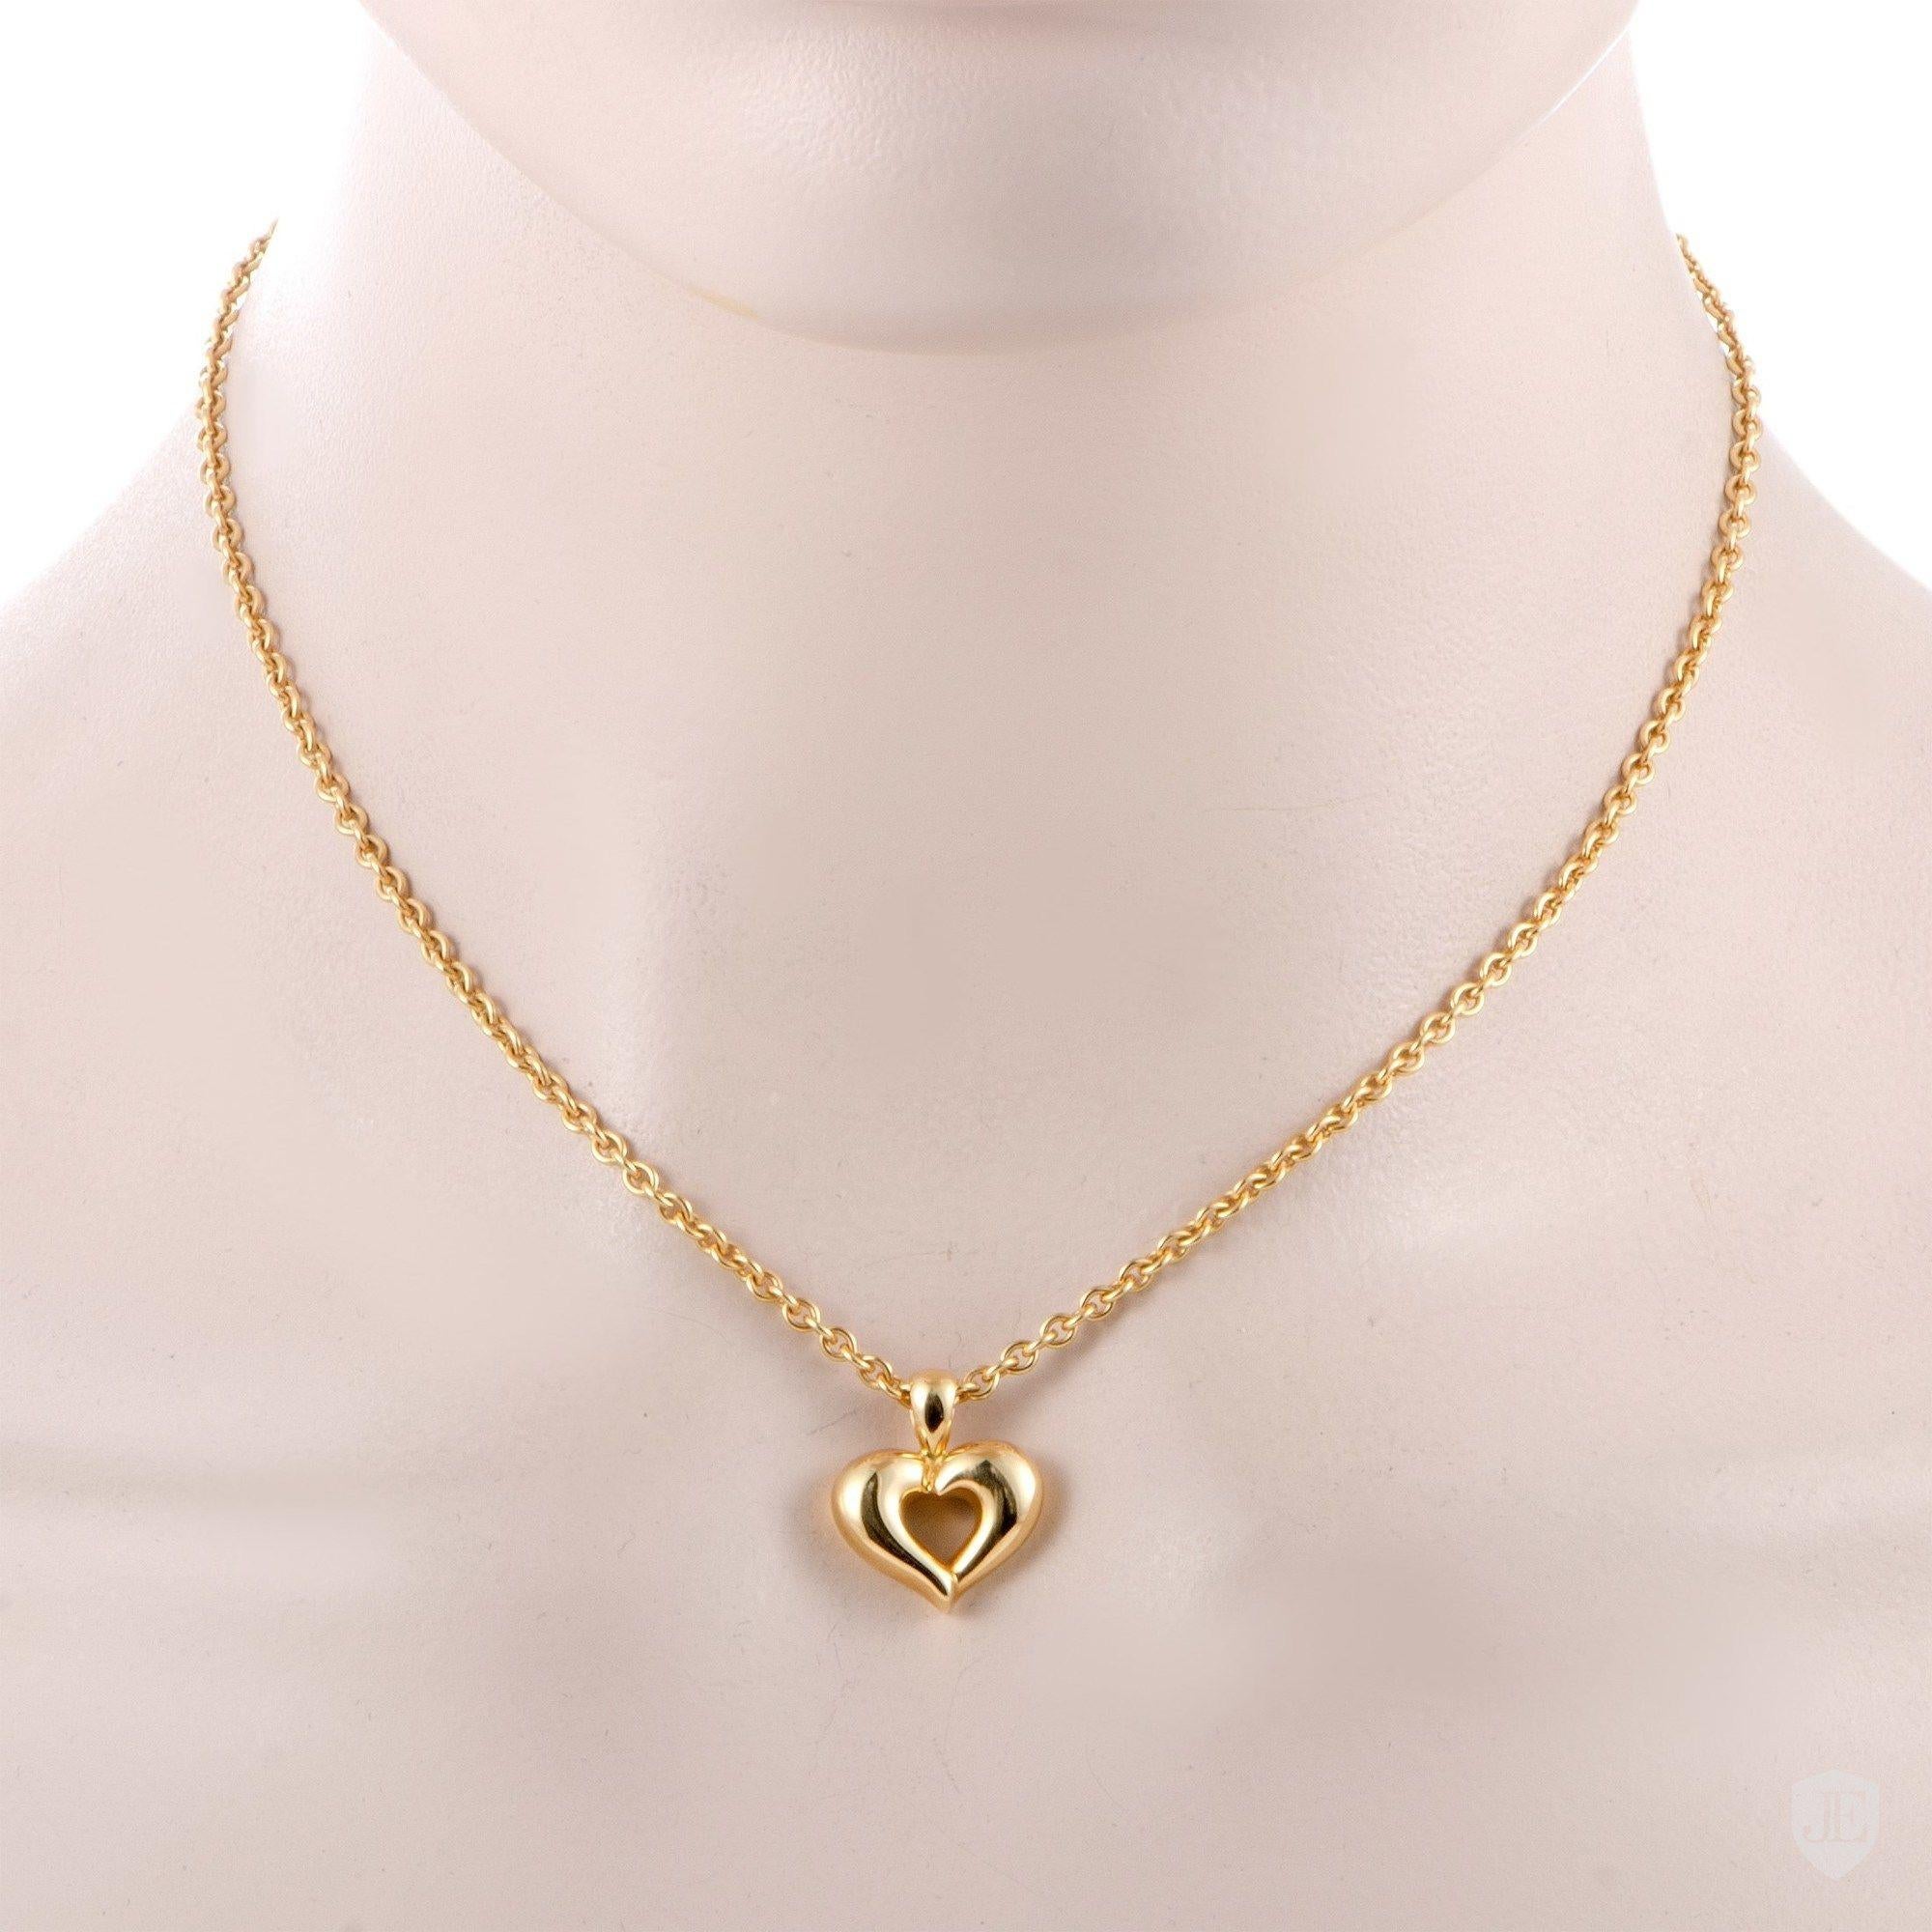 
LThis delightful necklace offers a splendidly feminine appearance, boasting a lovely heart pendant that is presented on a stylish rolo chain. The necklace is designed by Van Cleef & Arpels and it is masterfully crafted from 18K yellow gold,